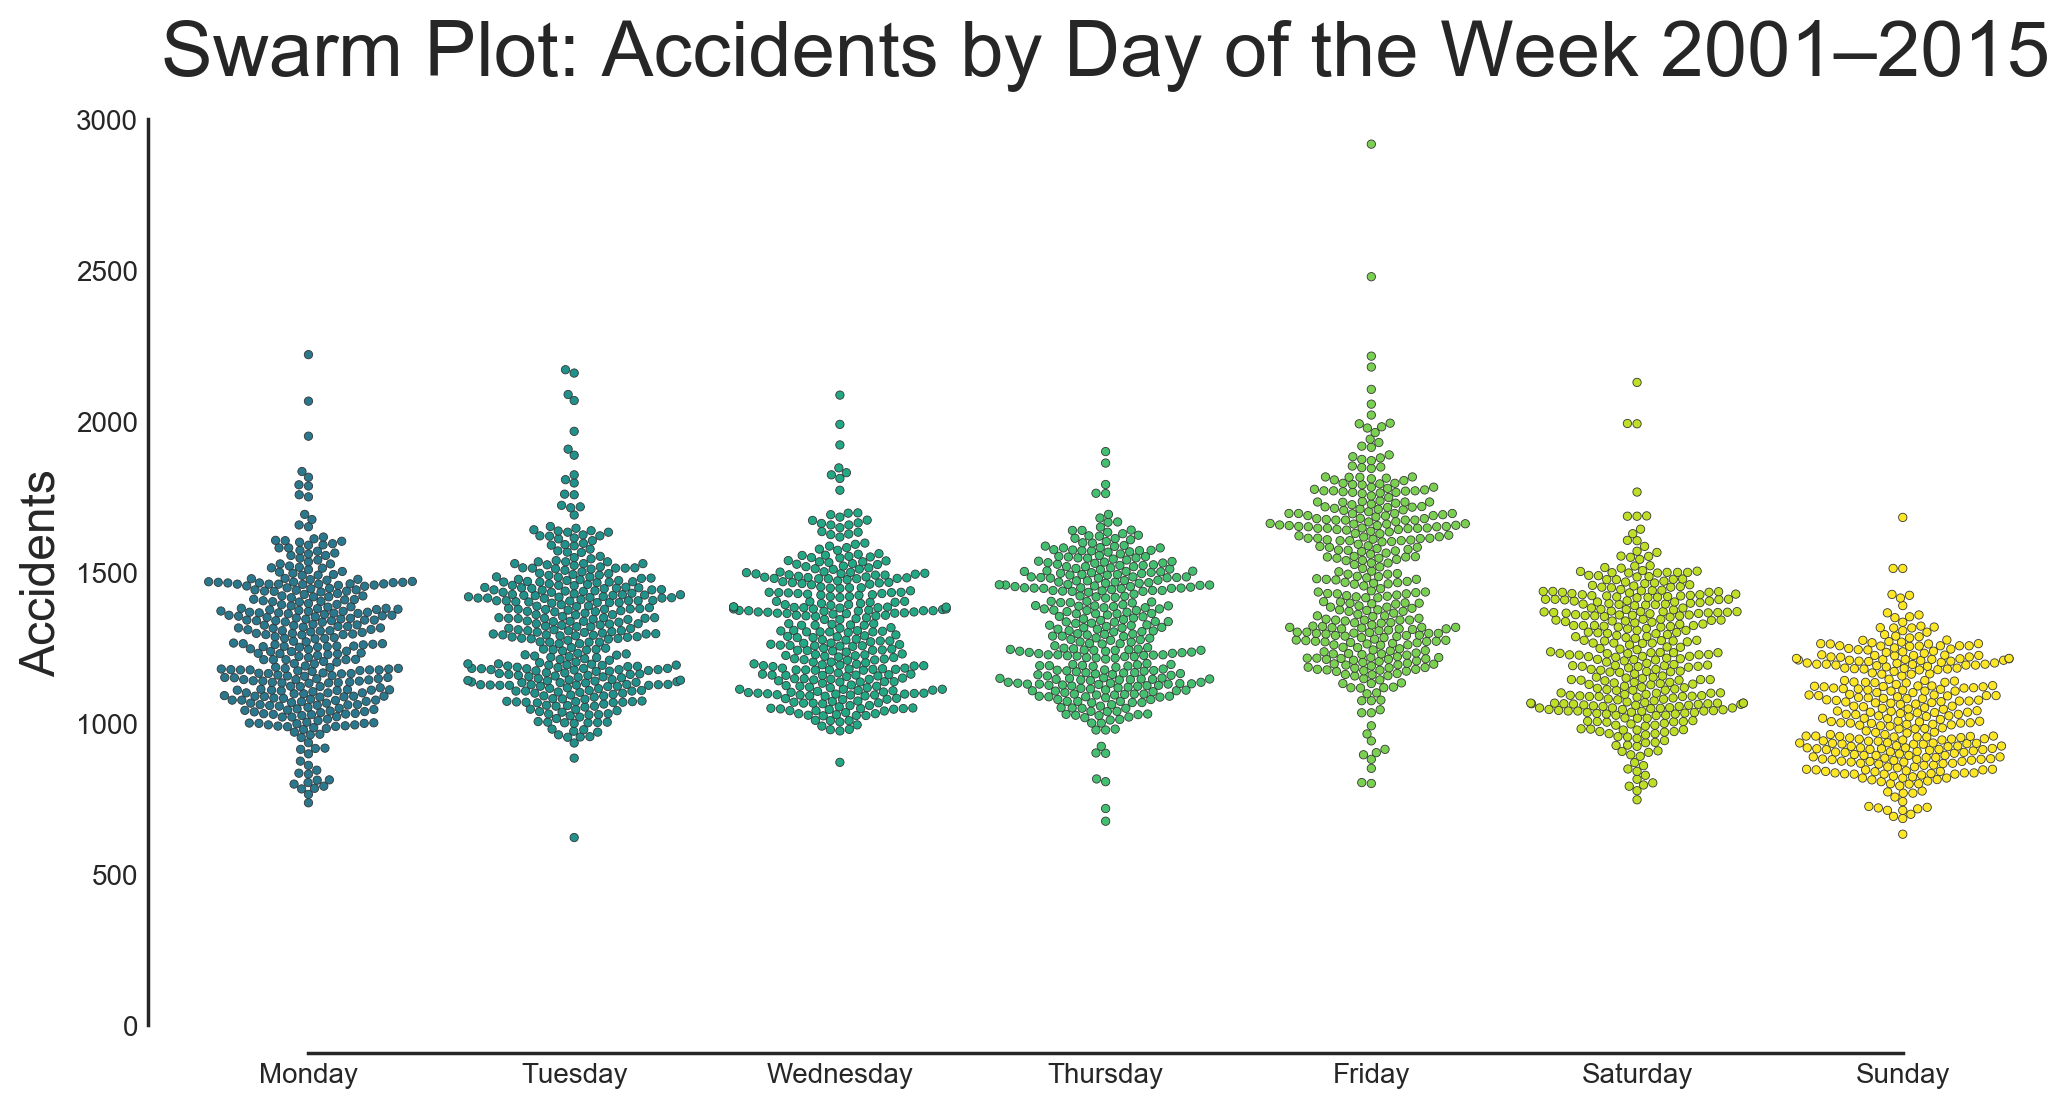 A swarm plot showing the distribution of crashes per day in California from 2001–2015 by day of the week.